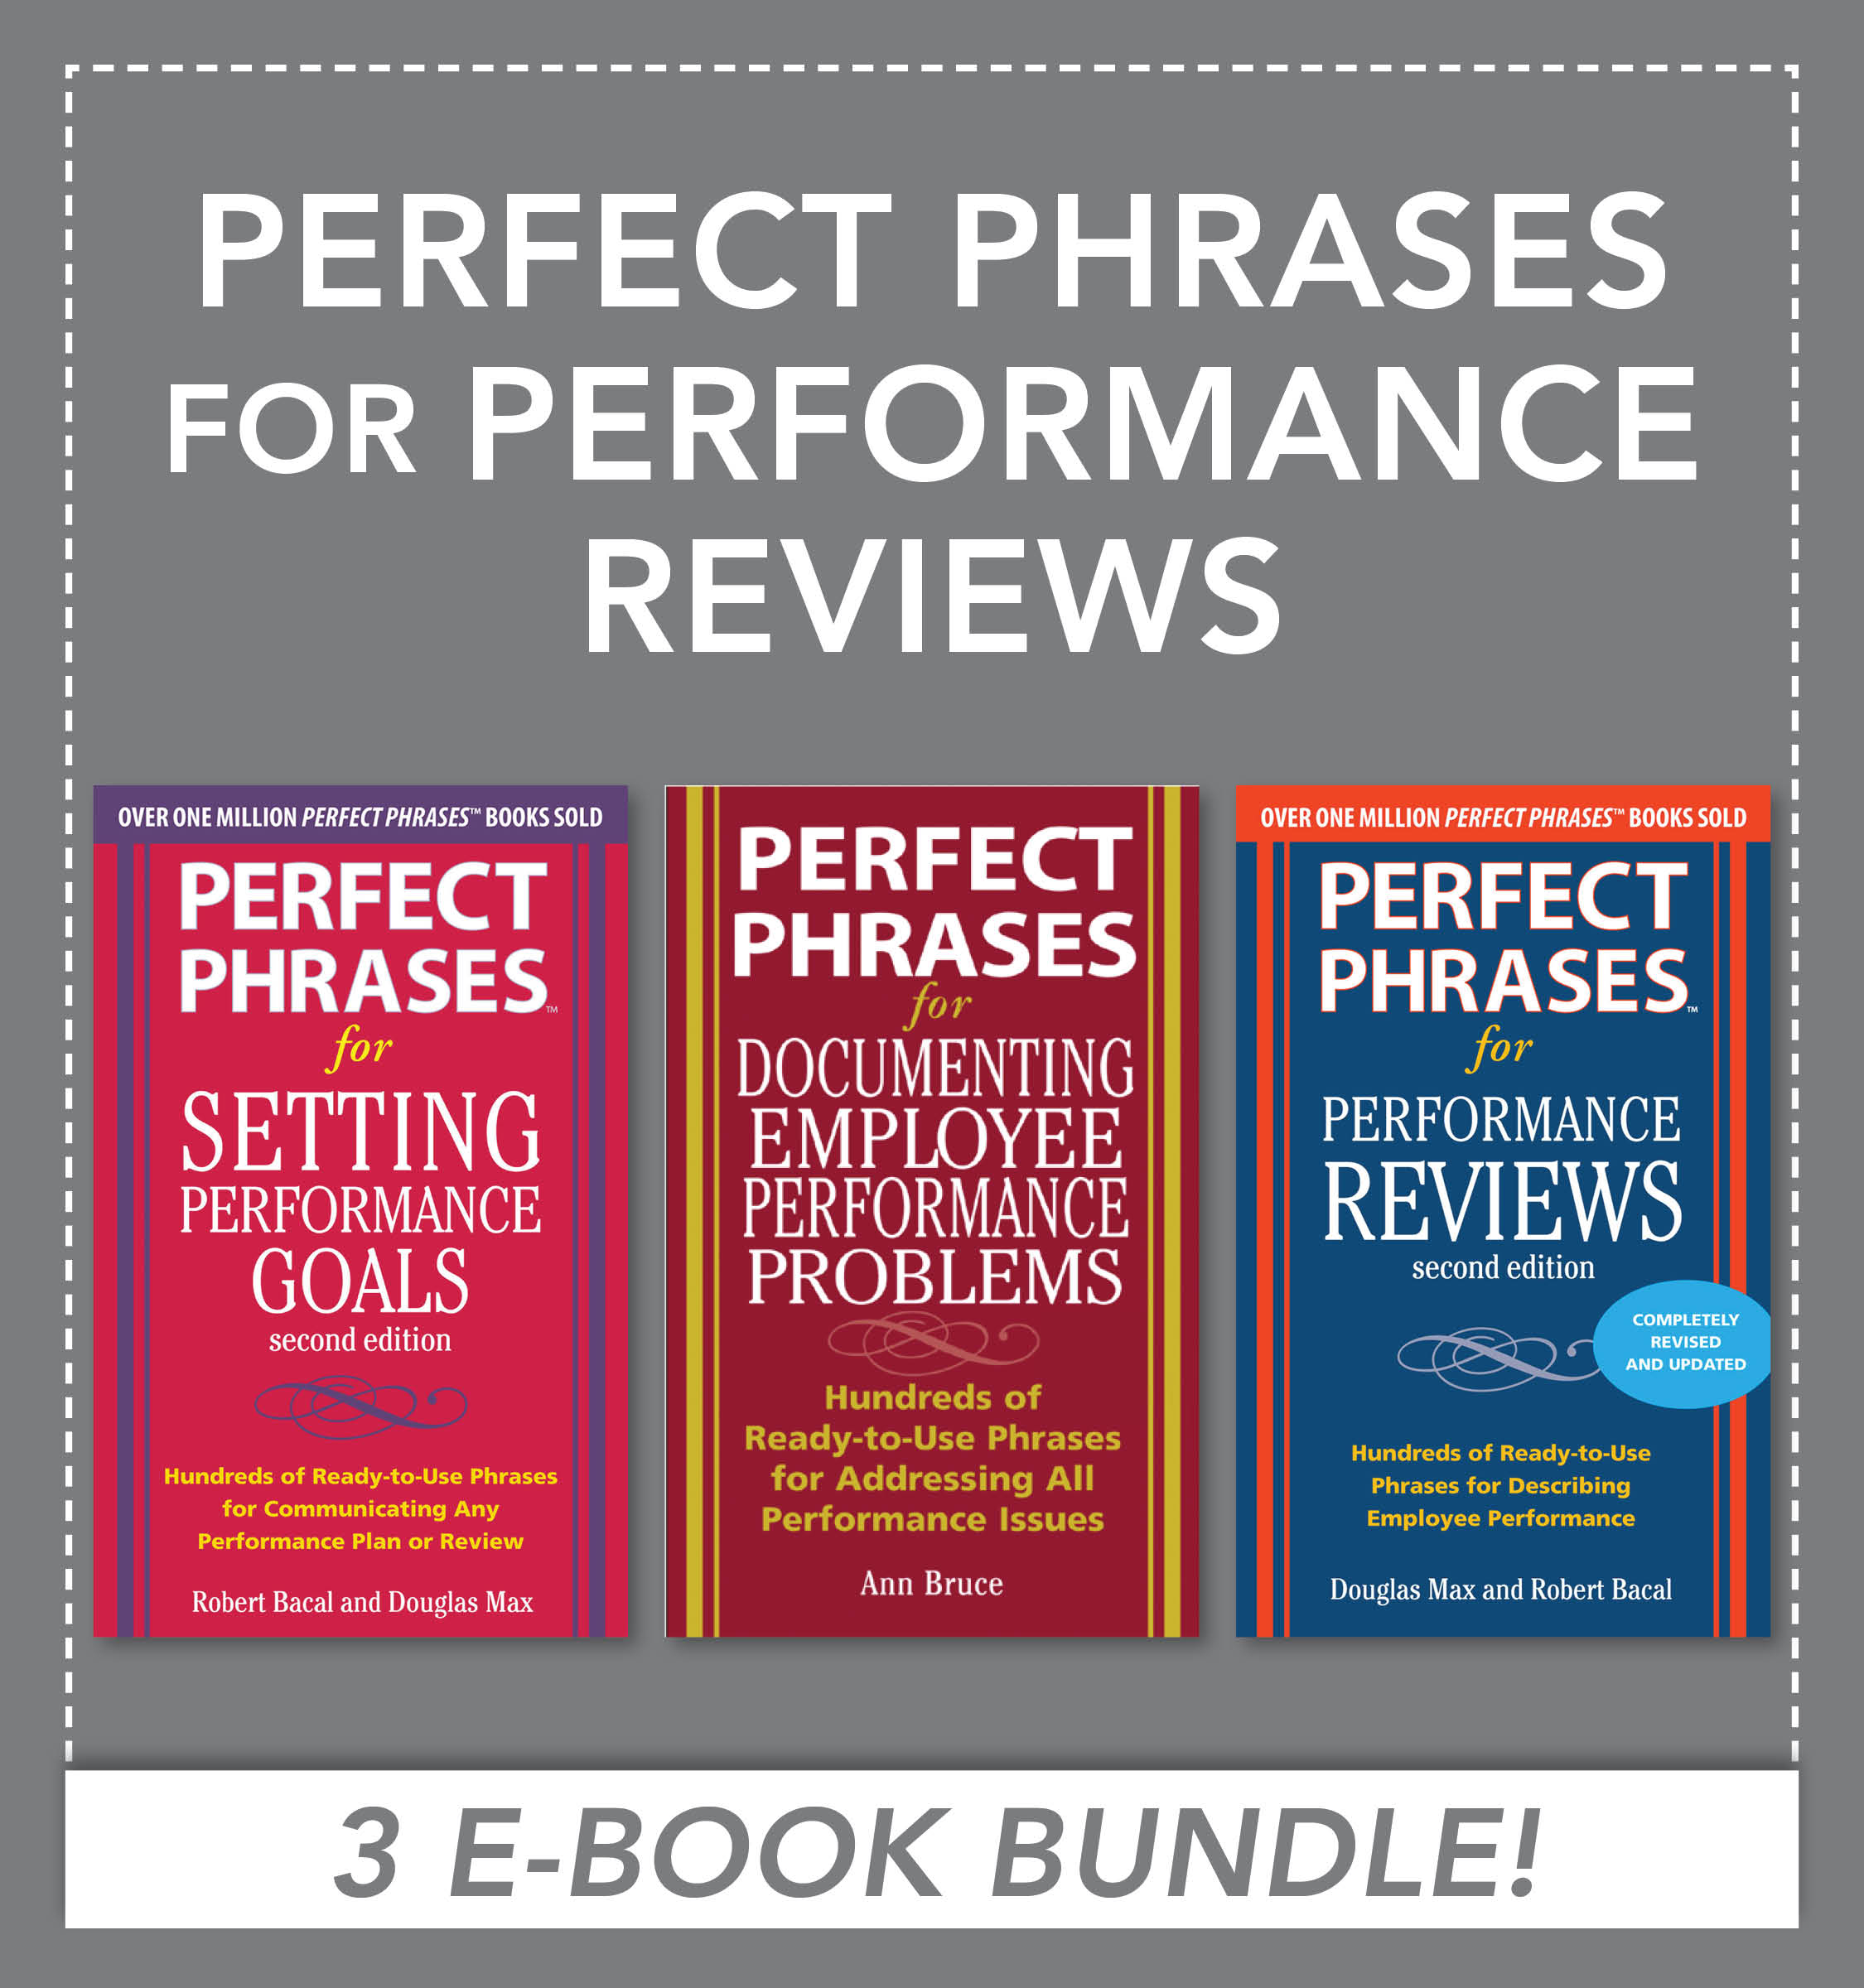 Book performance. Phrases for book Review. Perfect фраза. Phrases about books. Performance Review.